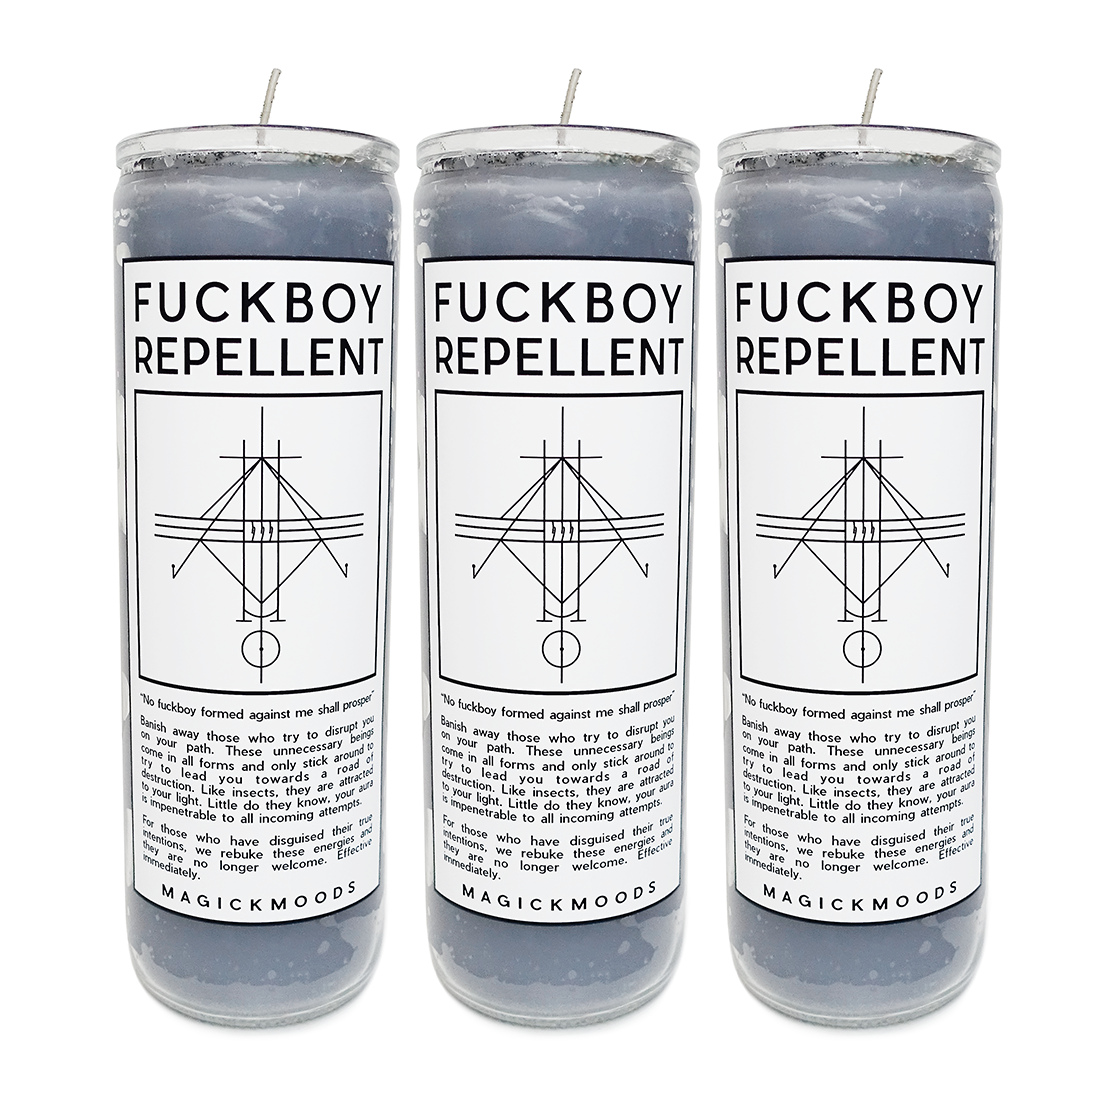 Fuckboy Repellent 7-Day Meditation Candle - PREORDER - Ships by July 28th, 2023